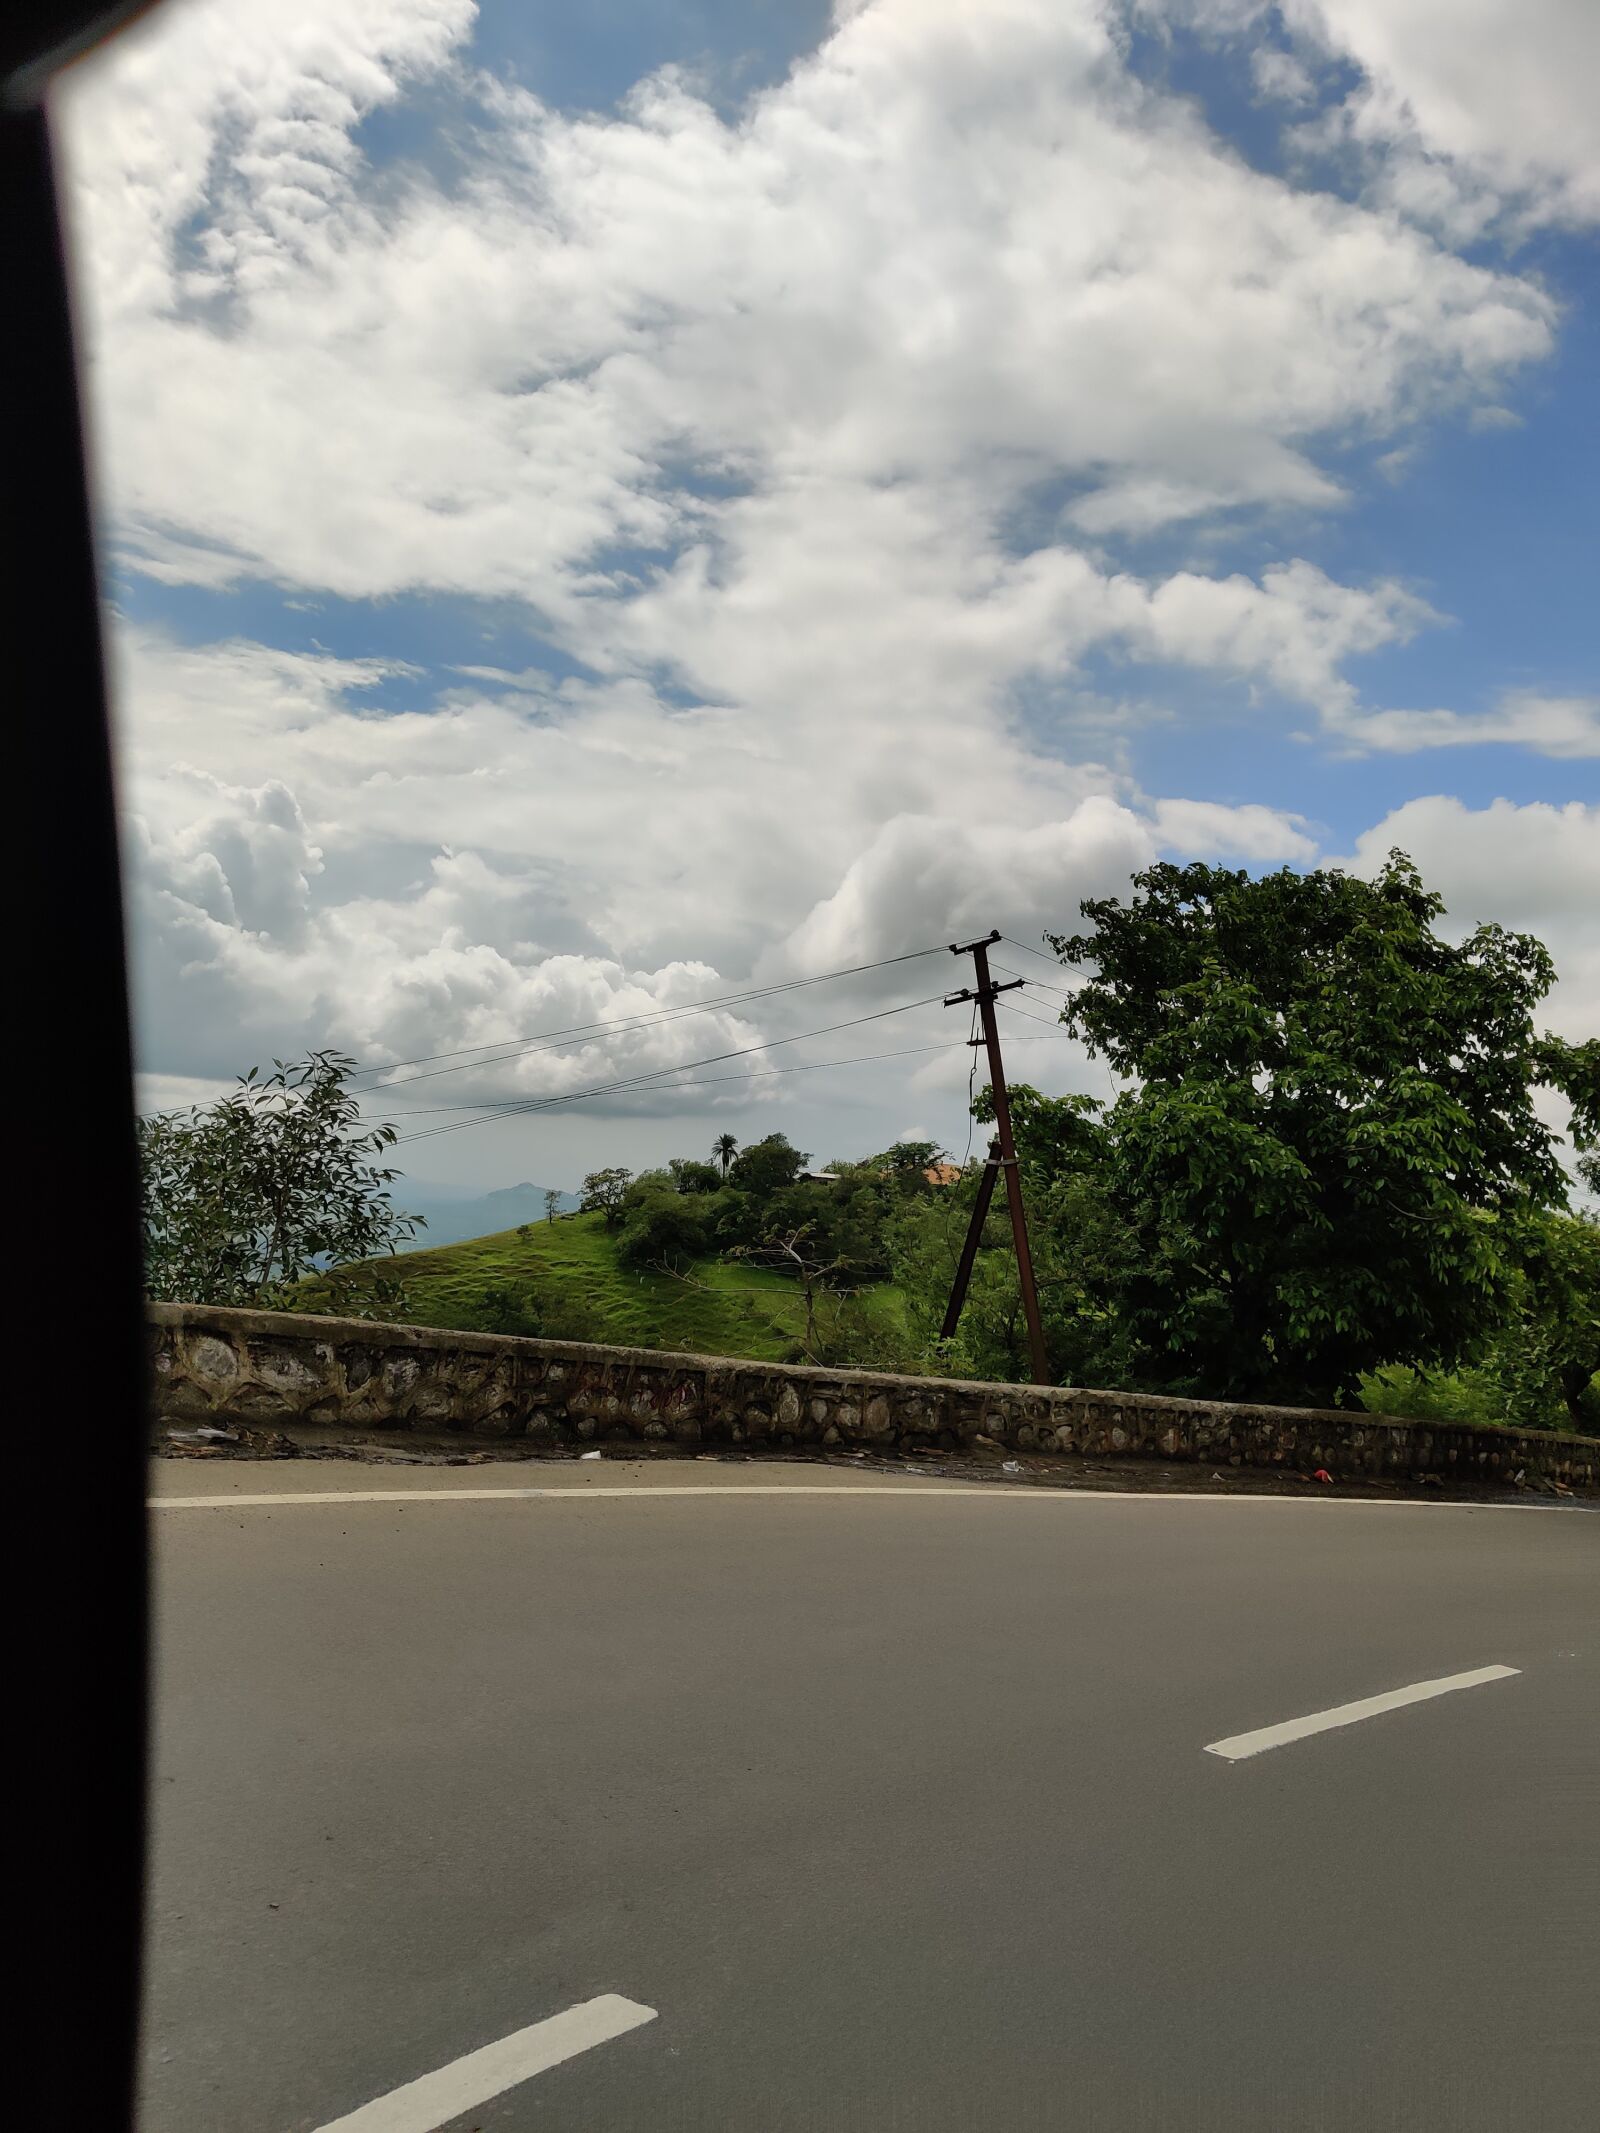 OnePlus HD1901 sample photo. Road, sky, clouds photography